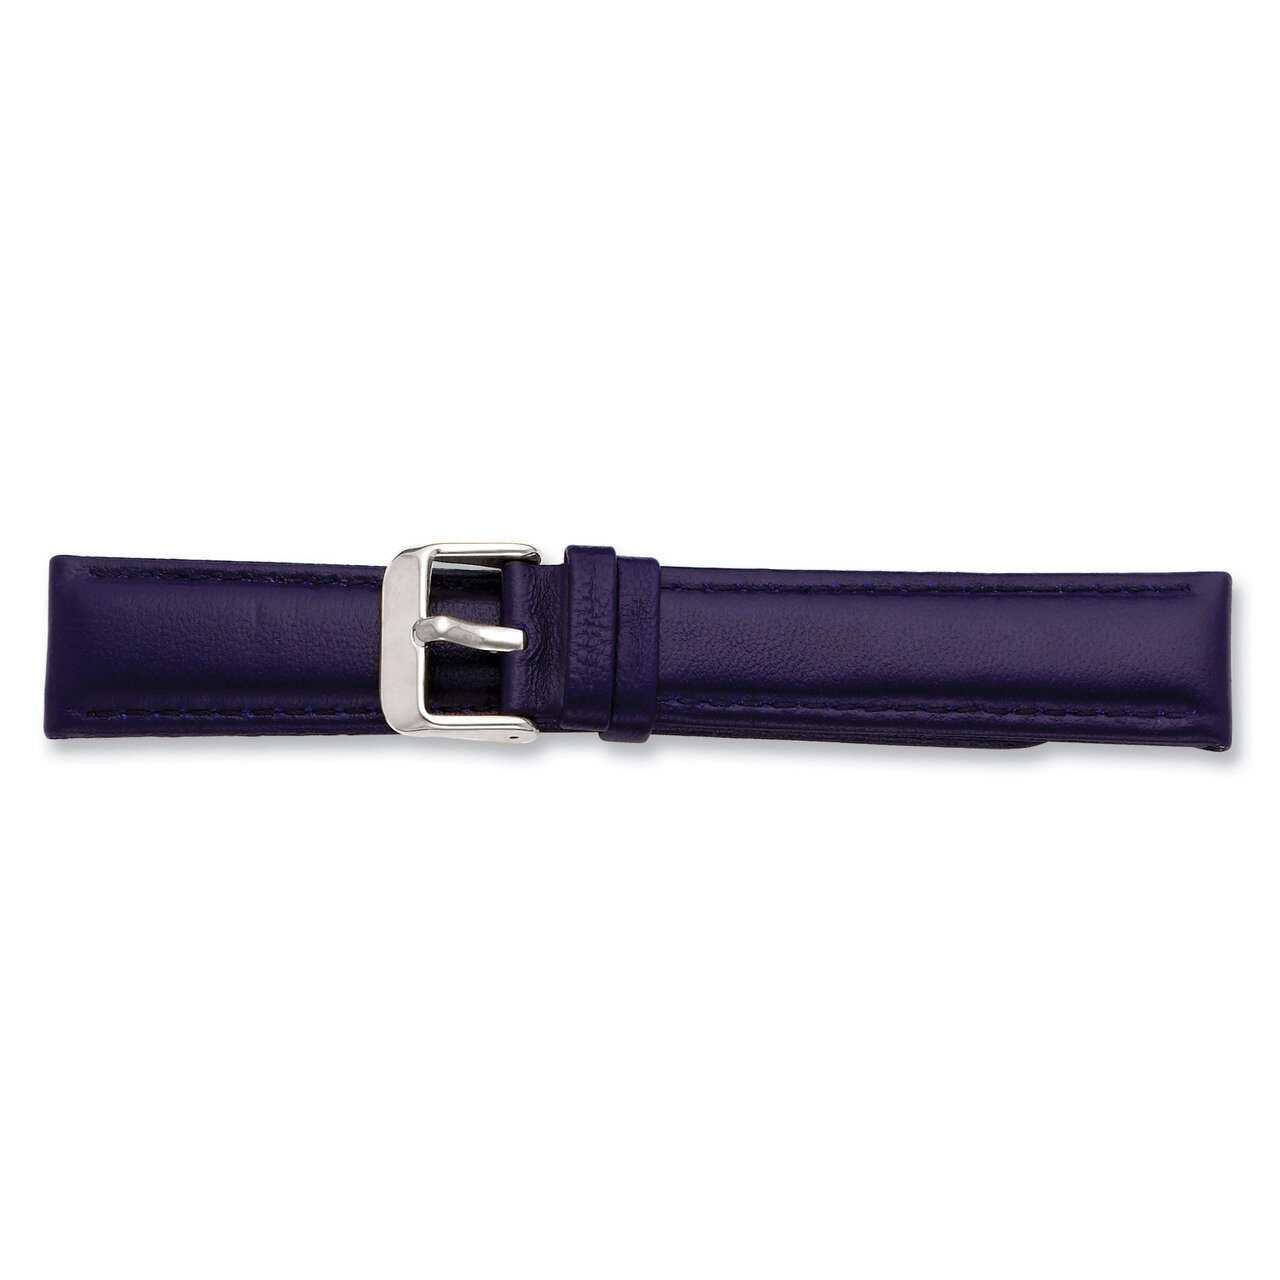 14mm Navy Glove Leather Watch Band 6.75 Inch Silver-tone Buckle BAW198-14